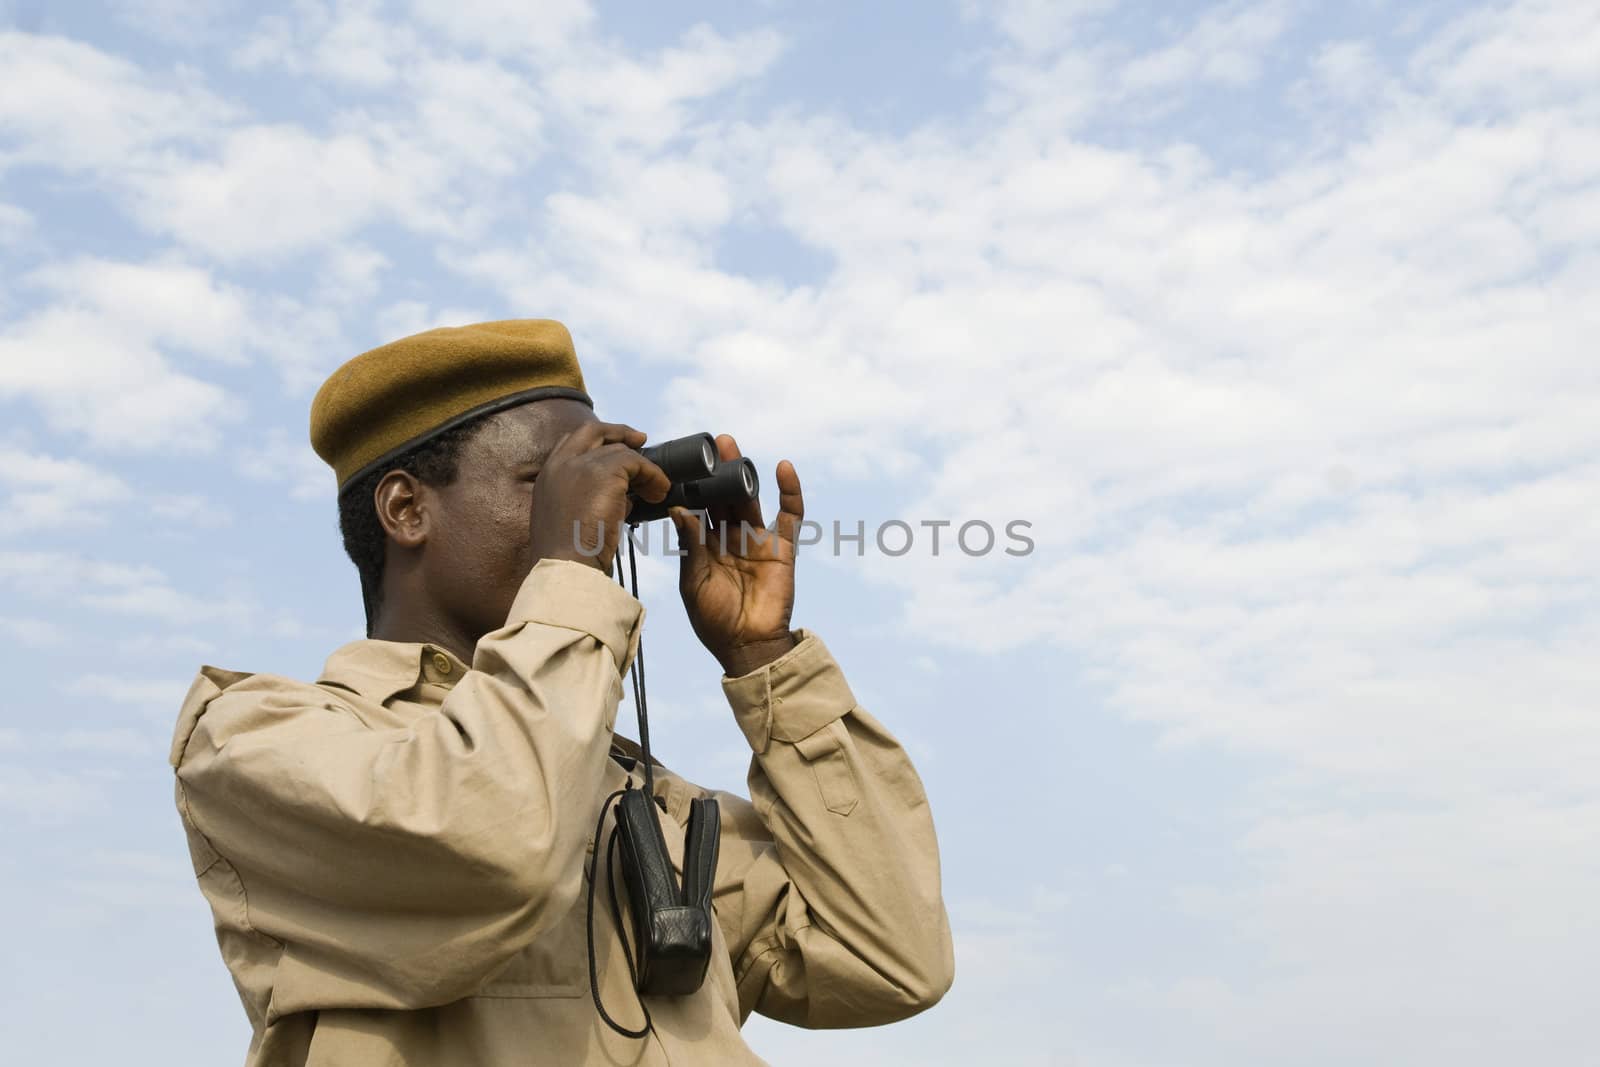 Watching out! African policemen with binoculars by stockbymh